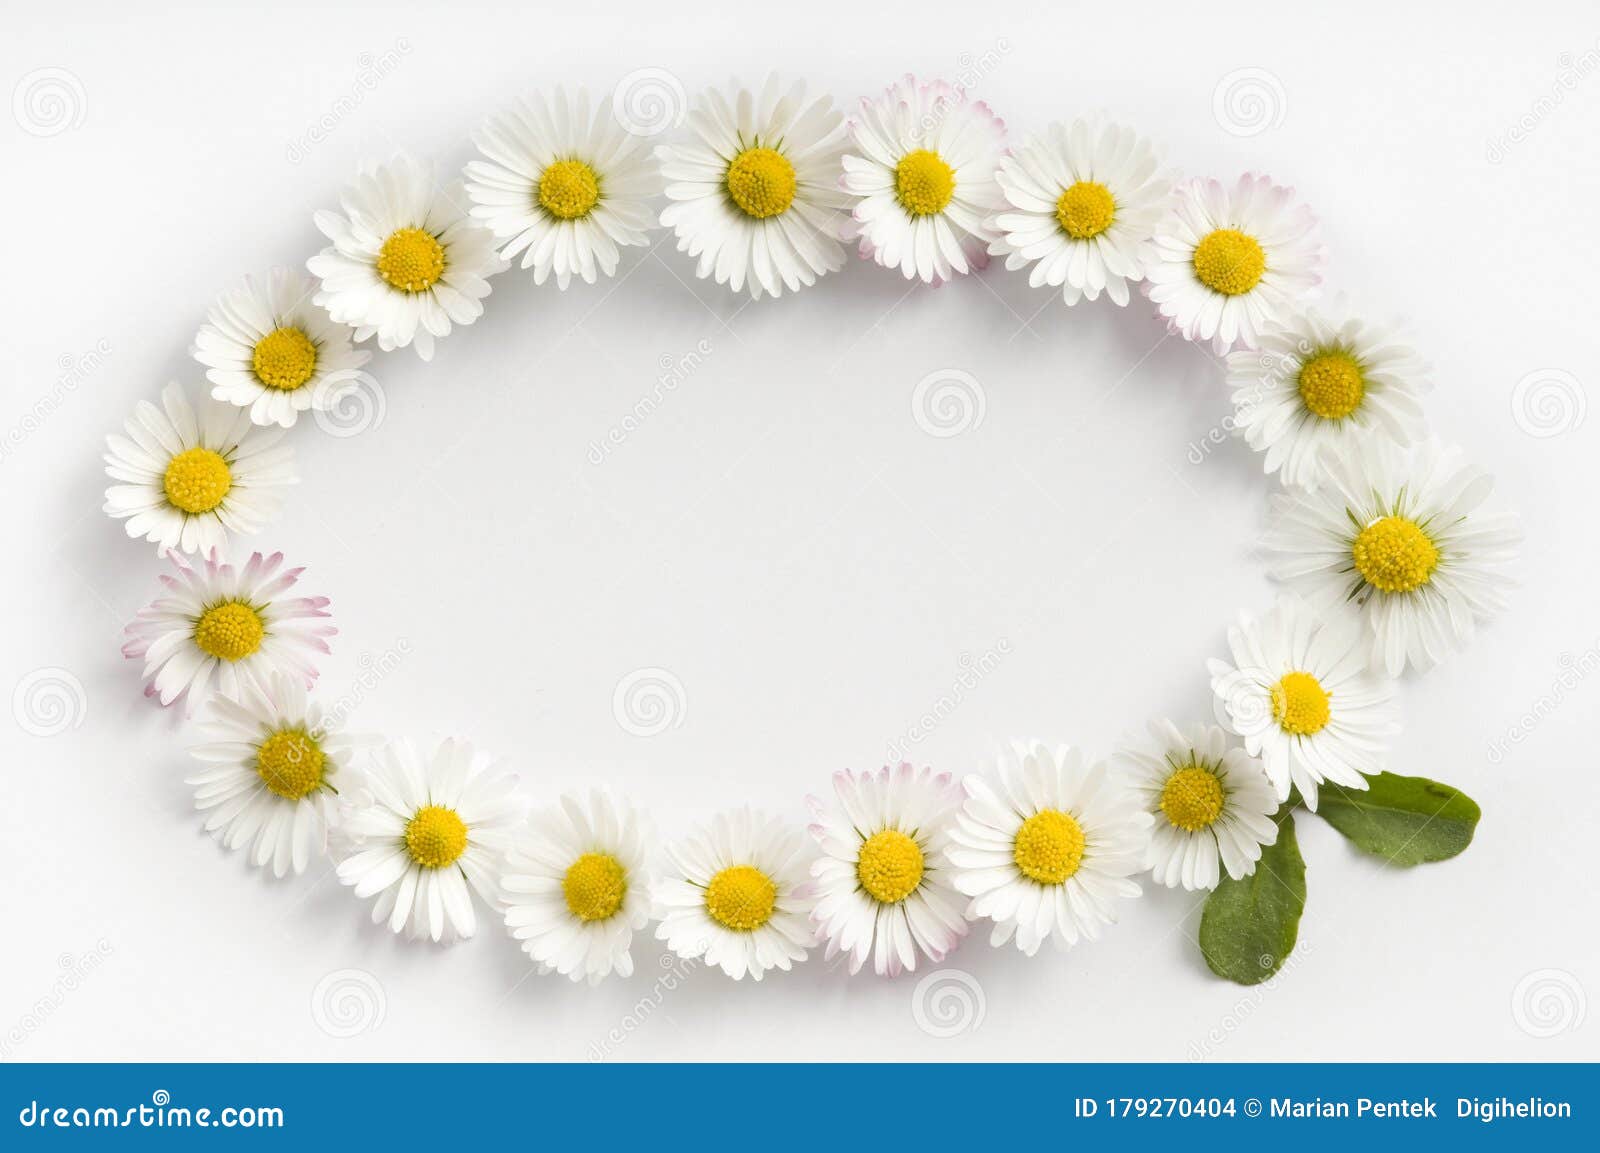 elipse-d frame made of fresh white-yellow daisy flowers on white background.